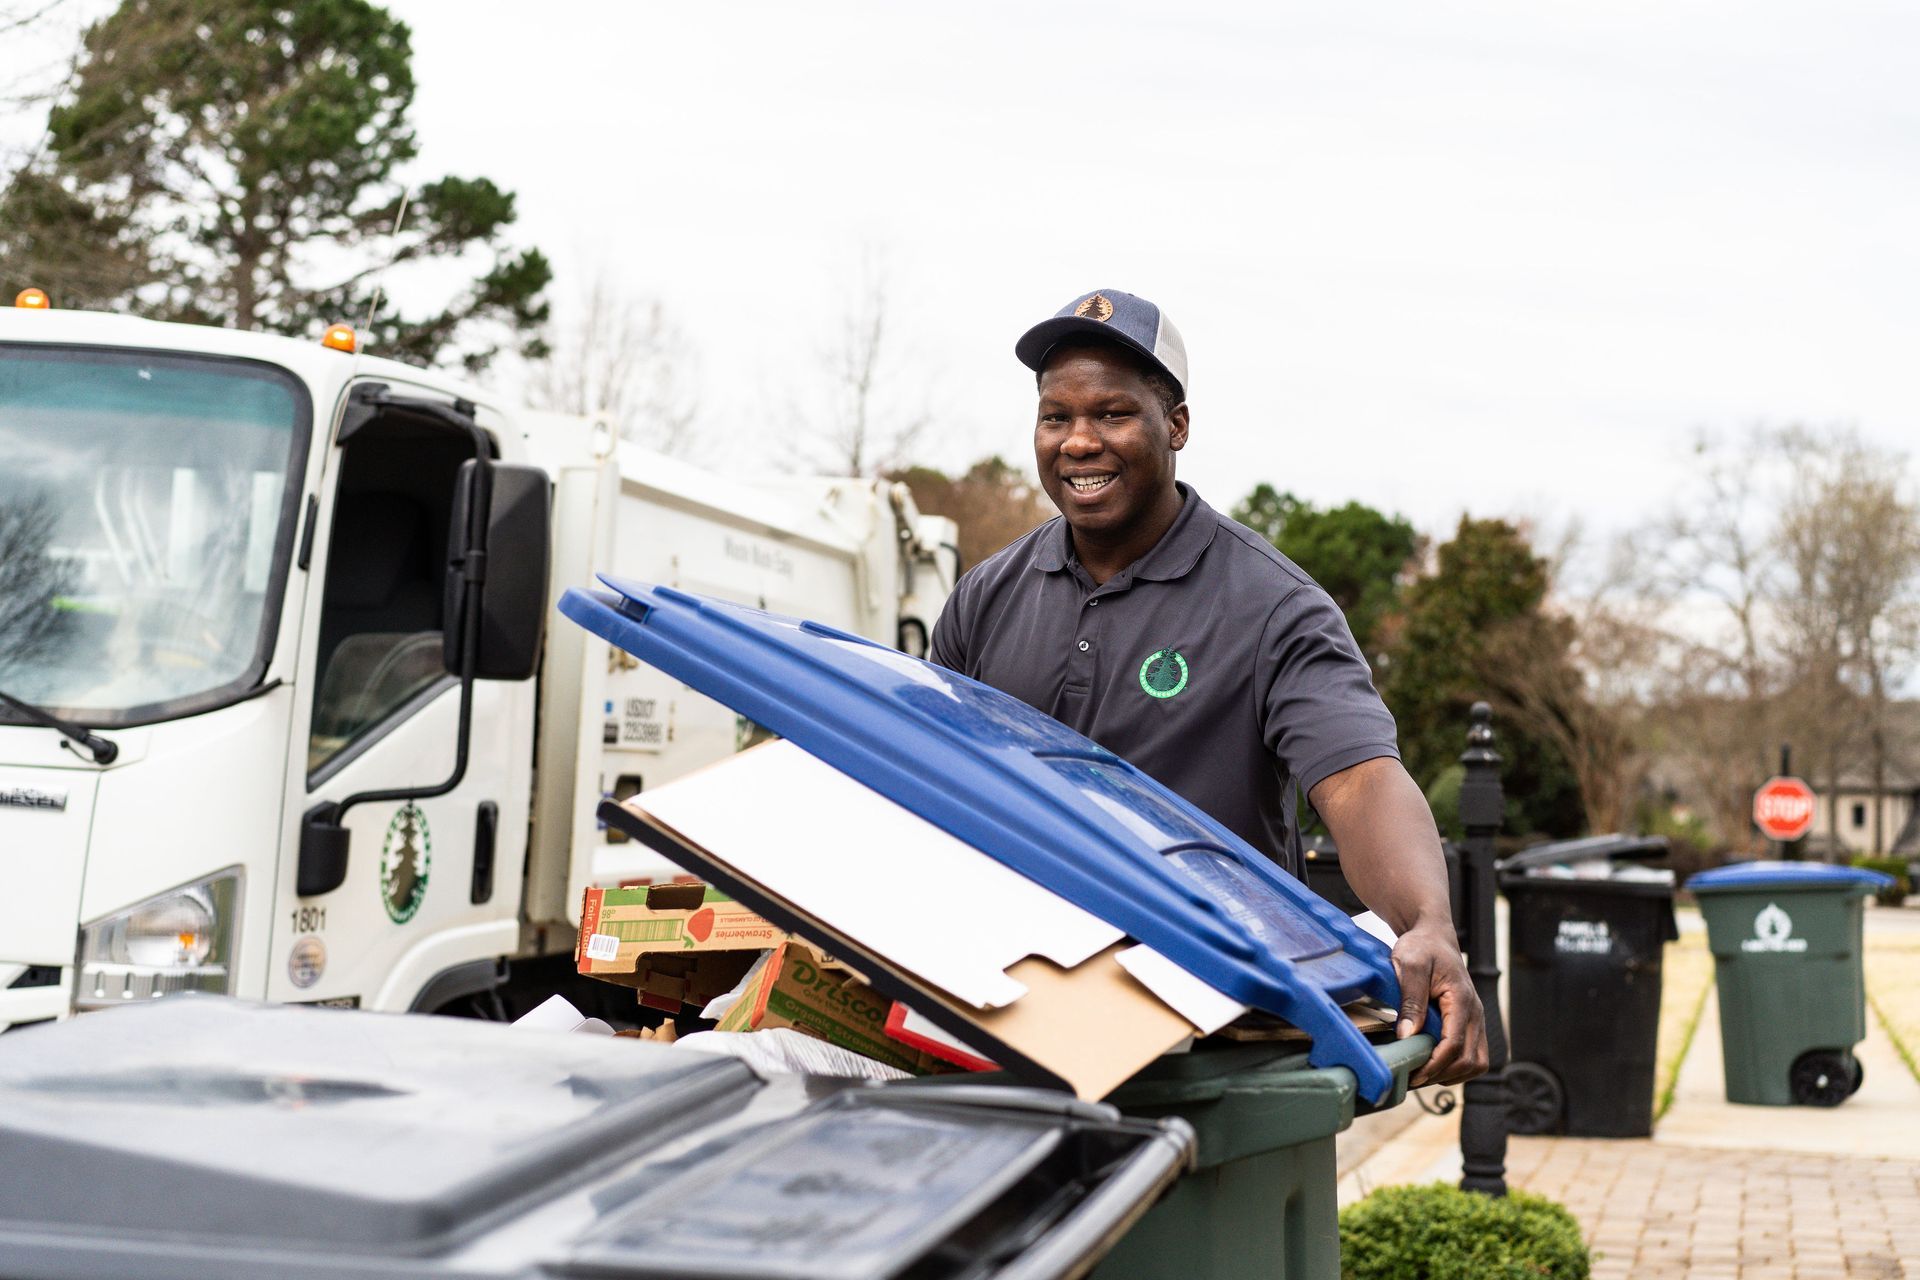 The Process of Responsible Recycling in Upstate South Carolina